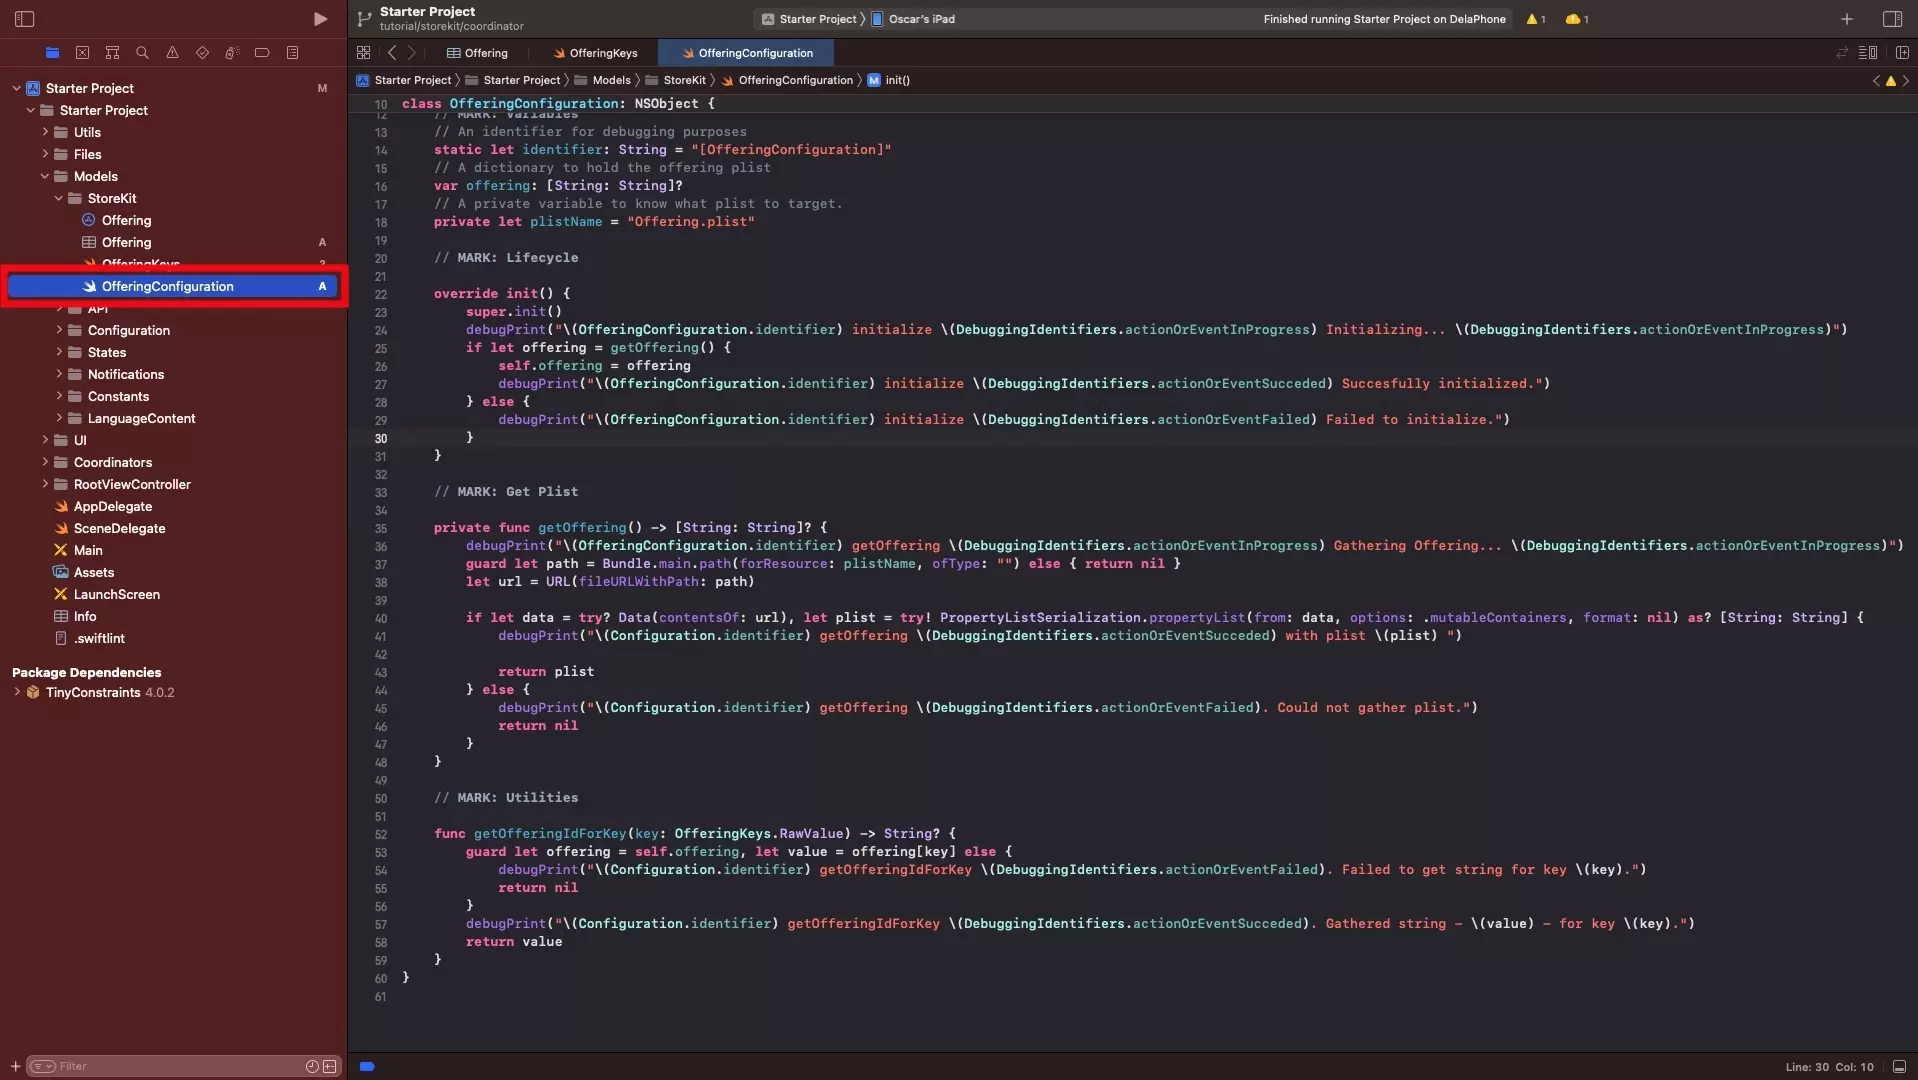 A screenshot of XCode with the OfferingConfiguration.swift highlighted and selected, showing the code available below.